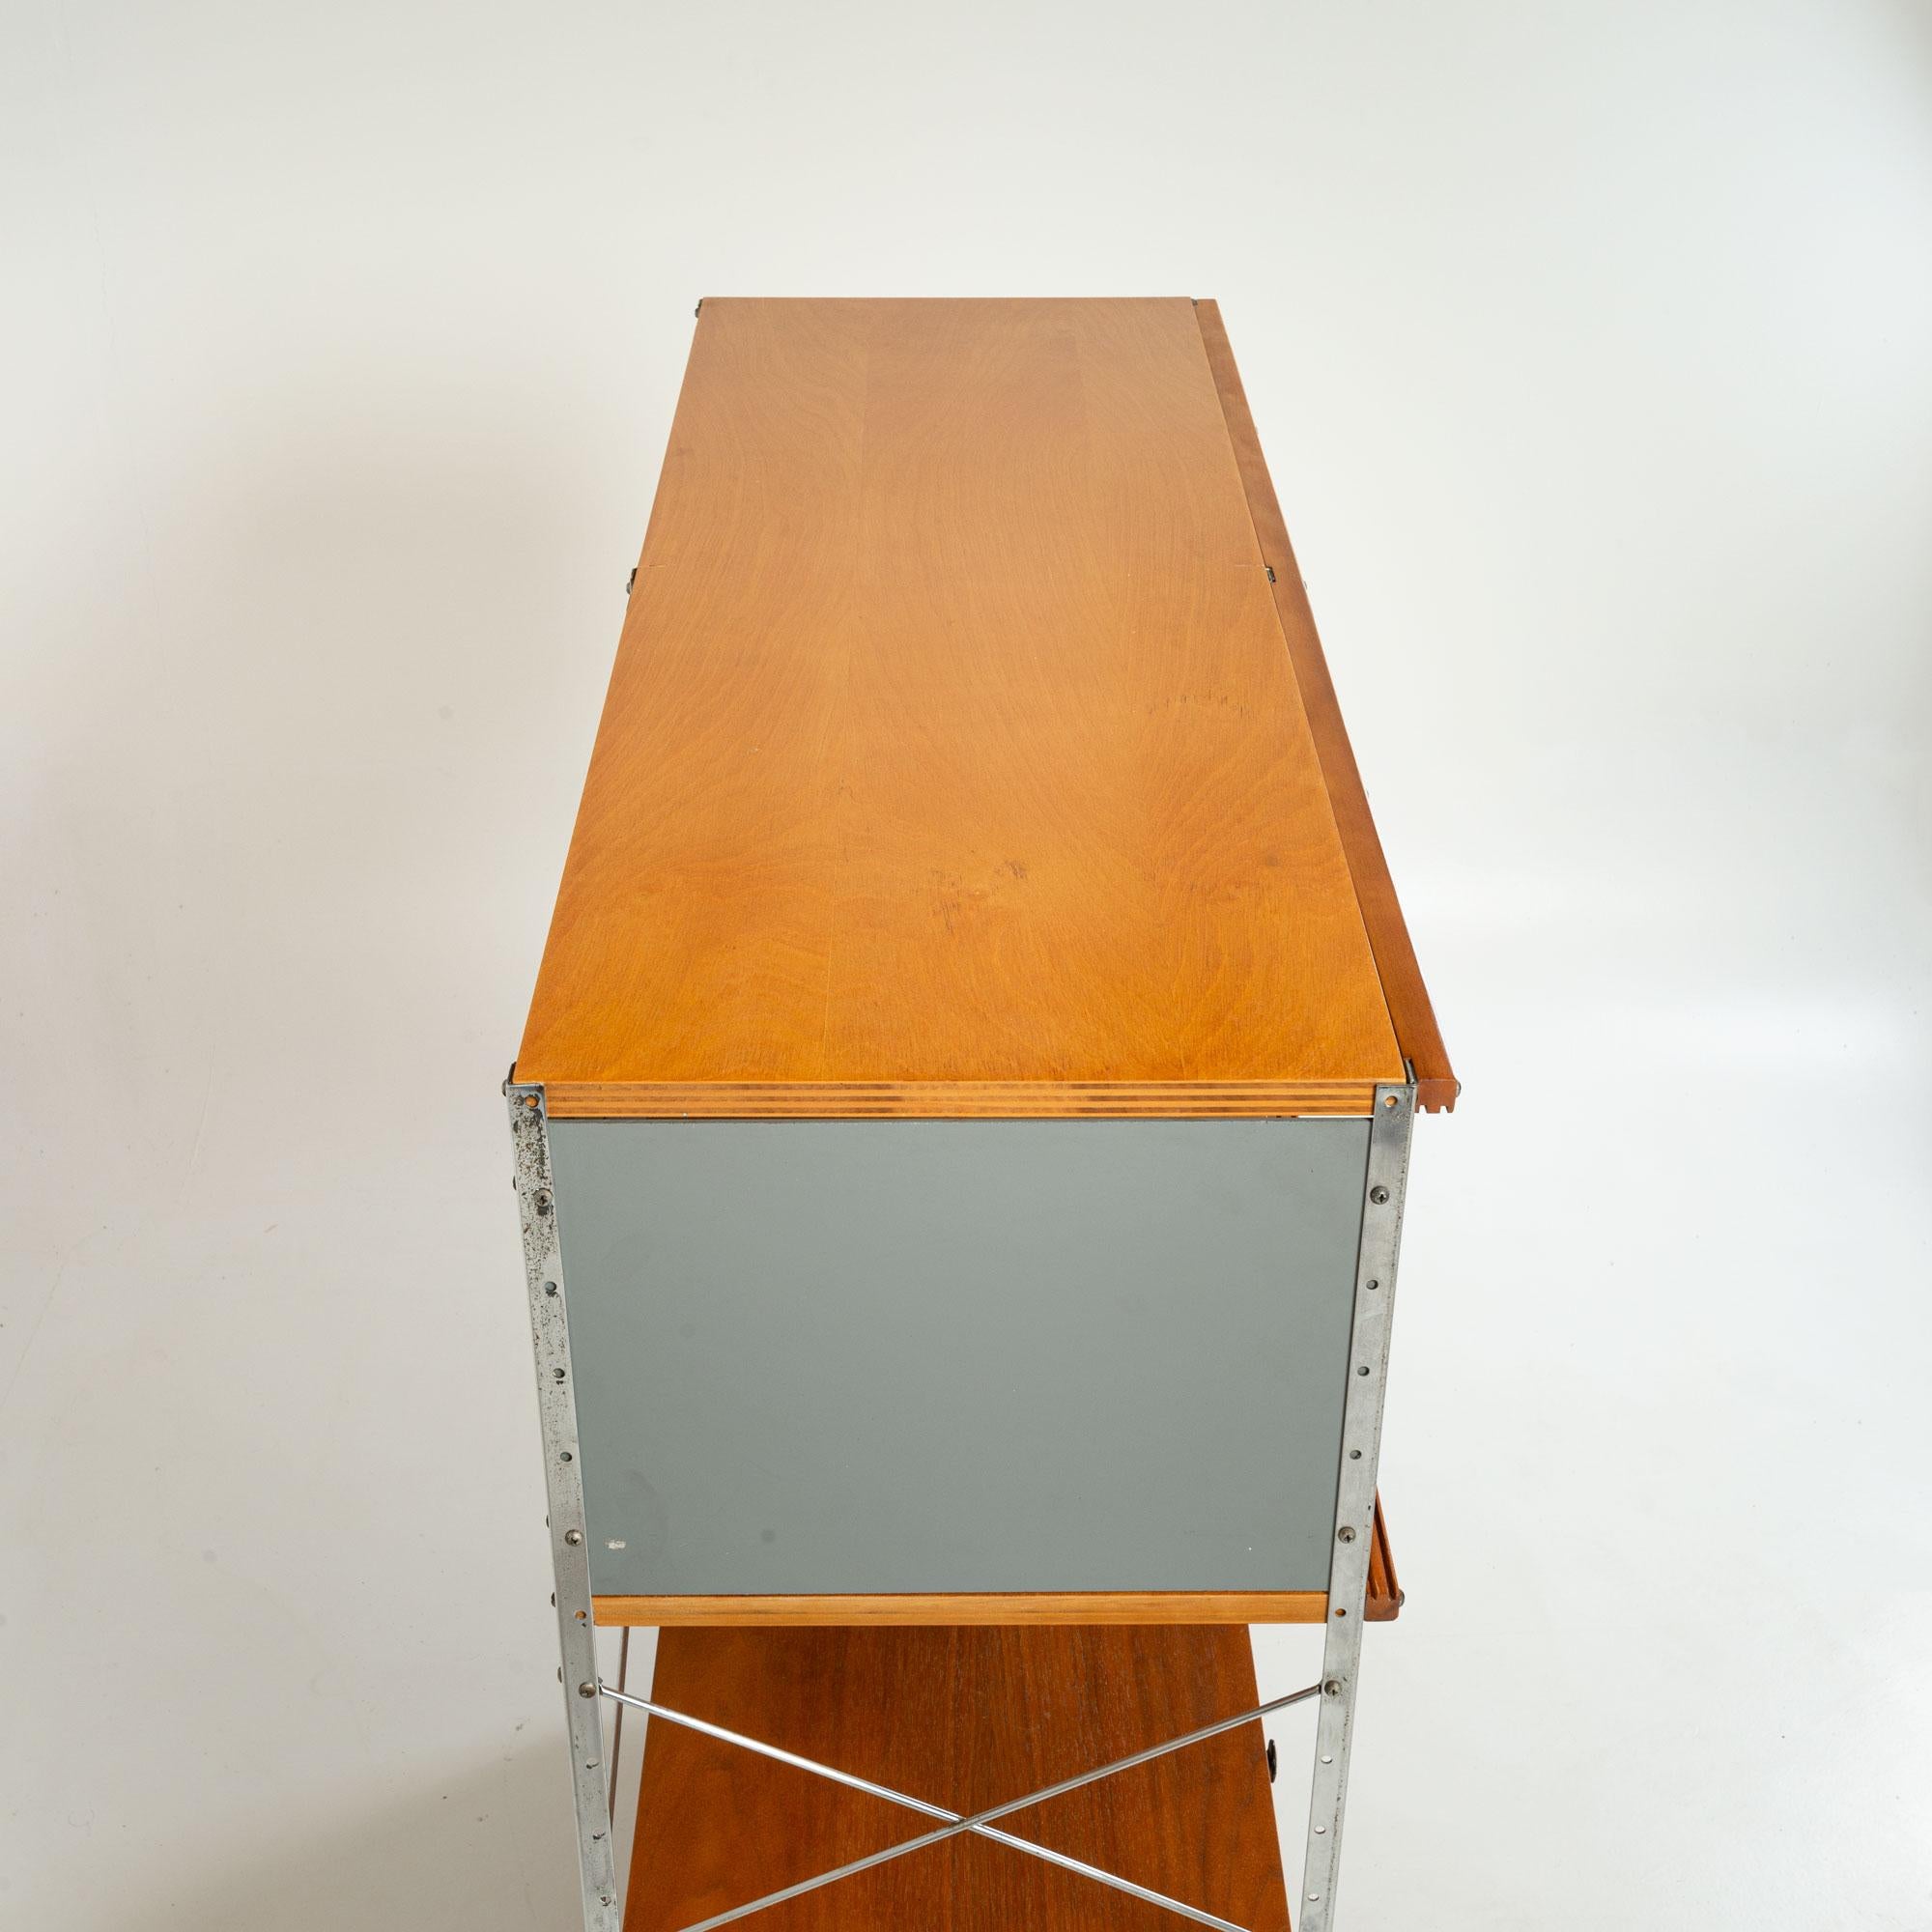 Second Generation Eames Storage Unit ESU 400-N series by Charles and Ray Eames 2